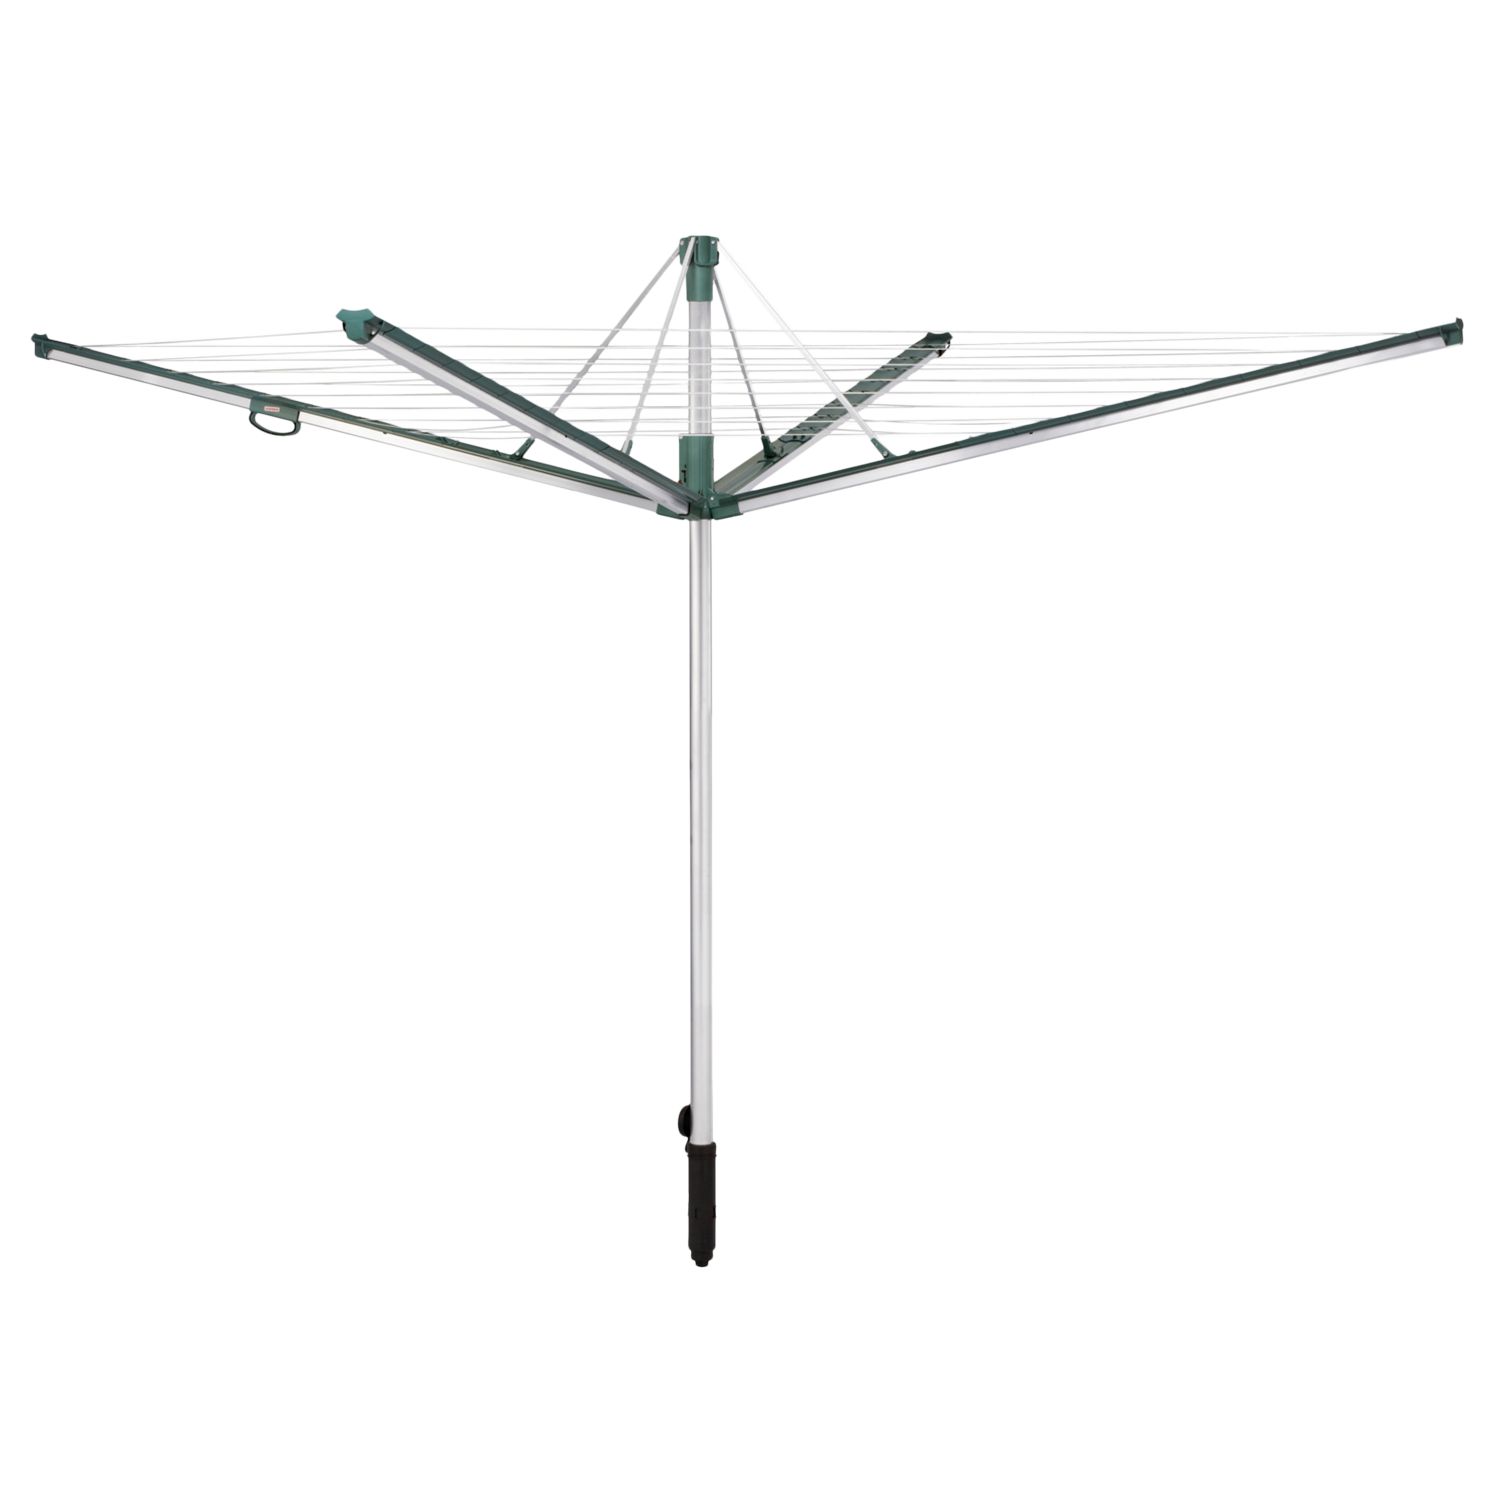 Leifheit Linomatic Plus 500 Outdoor Rotary Clothes Airer Washing Line